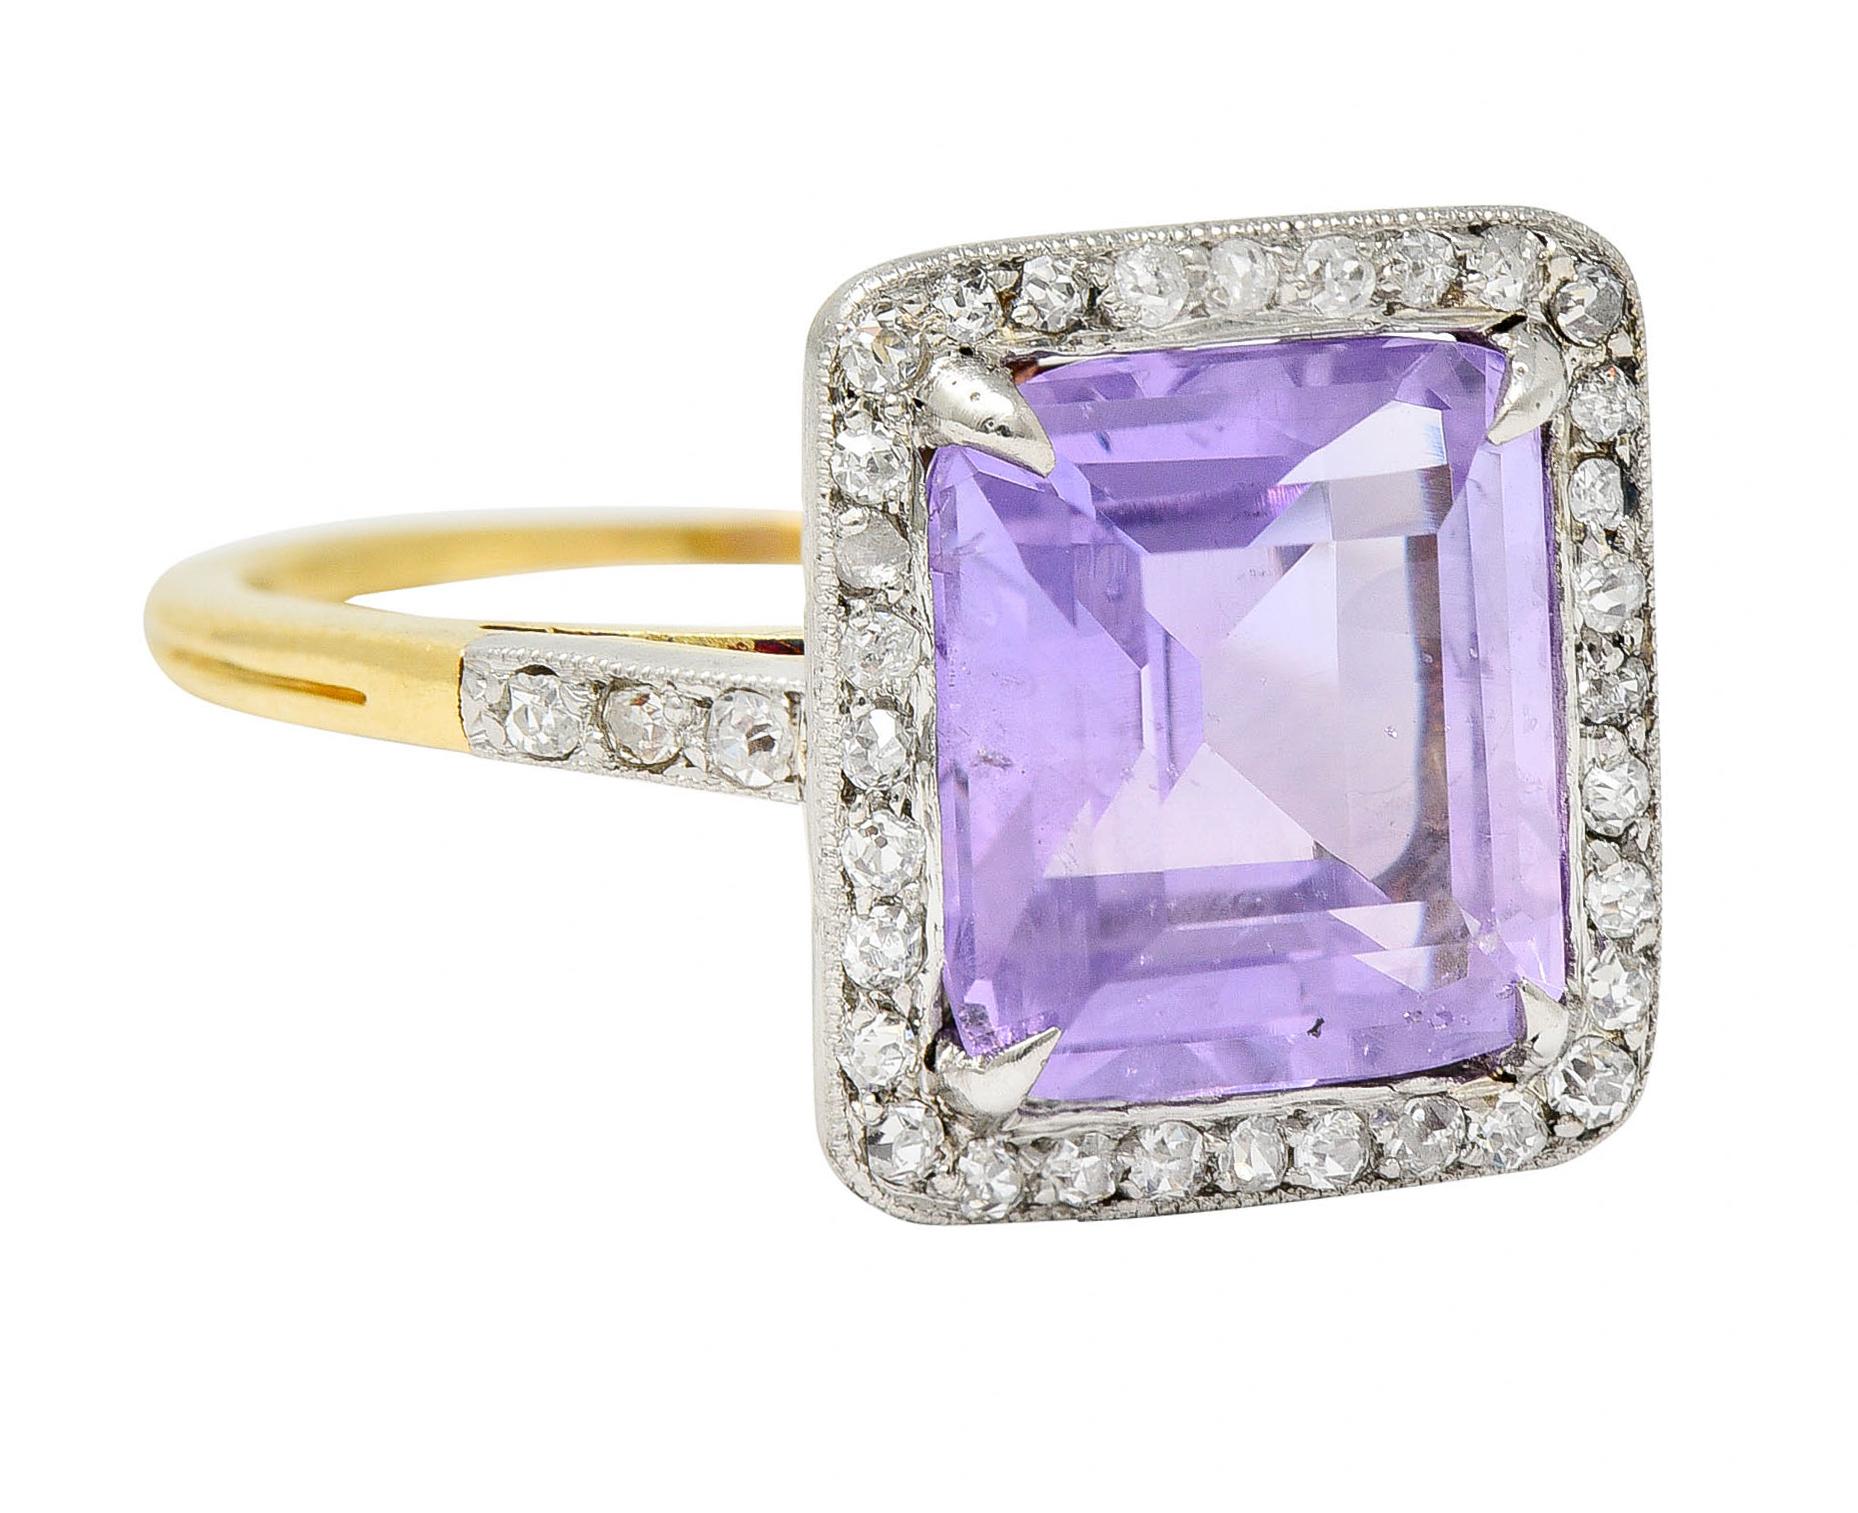 Featuring a rectangular step cut lavender sapphire weighing approximately 4.64 carat with no indications of treatment

Transparent medium light violetish lavender in color

Surrounded by rose, single, and old European cut diamonds - set in